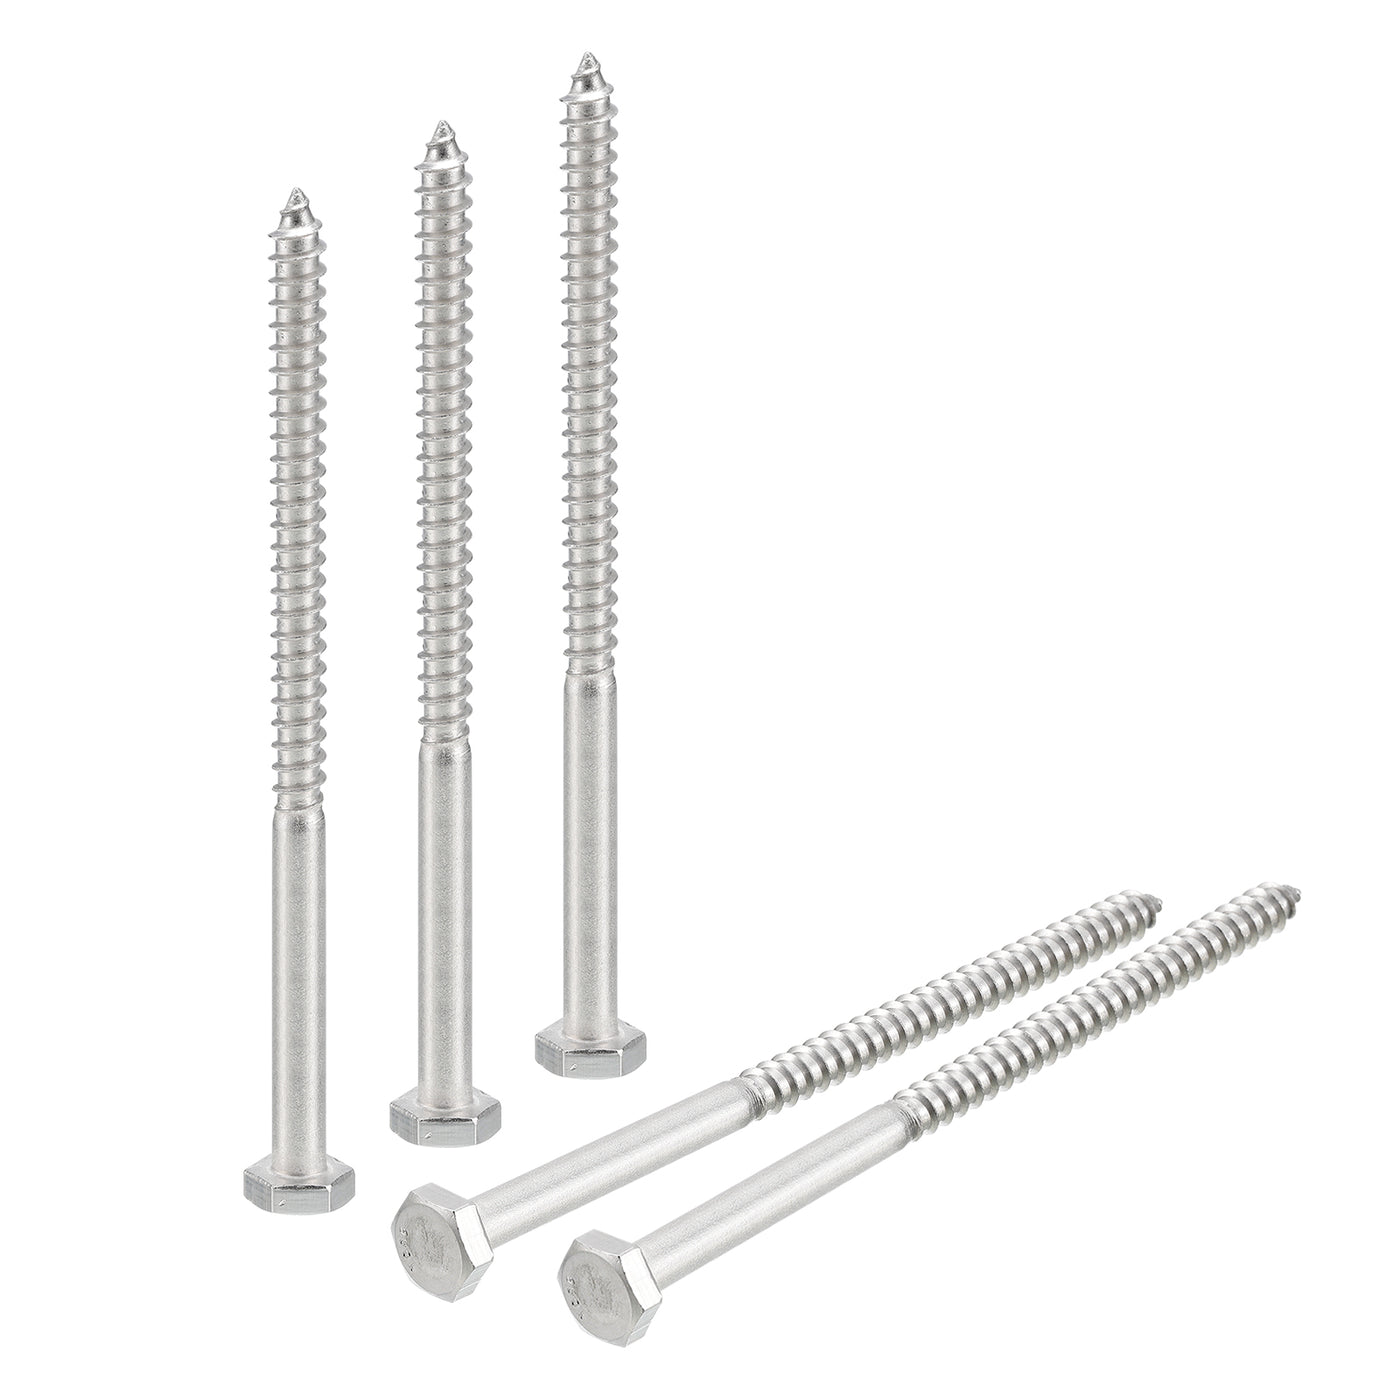 uxcell Uxcell Hex Head Lag Screws Bolts, 20pcs 1/4" x 4" 304 Stainless Steel Wood Screws